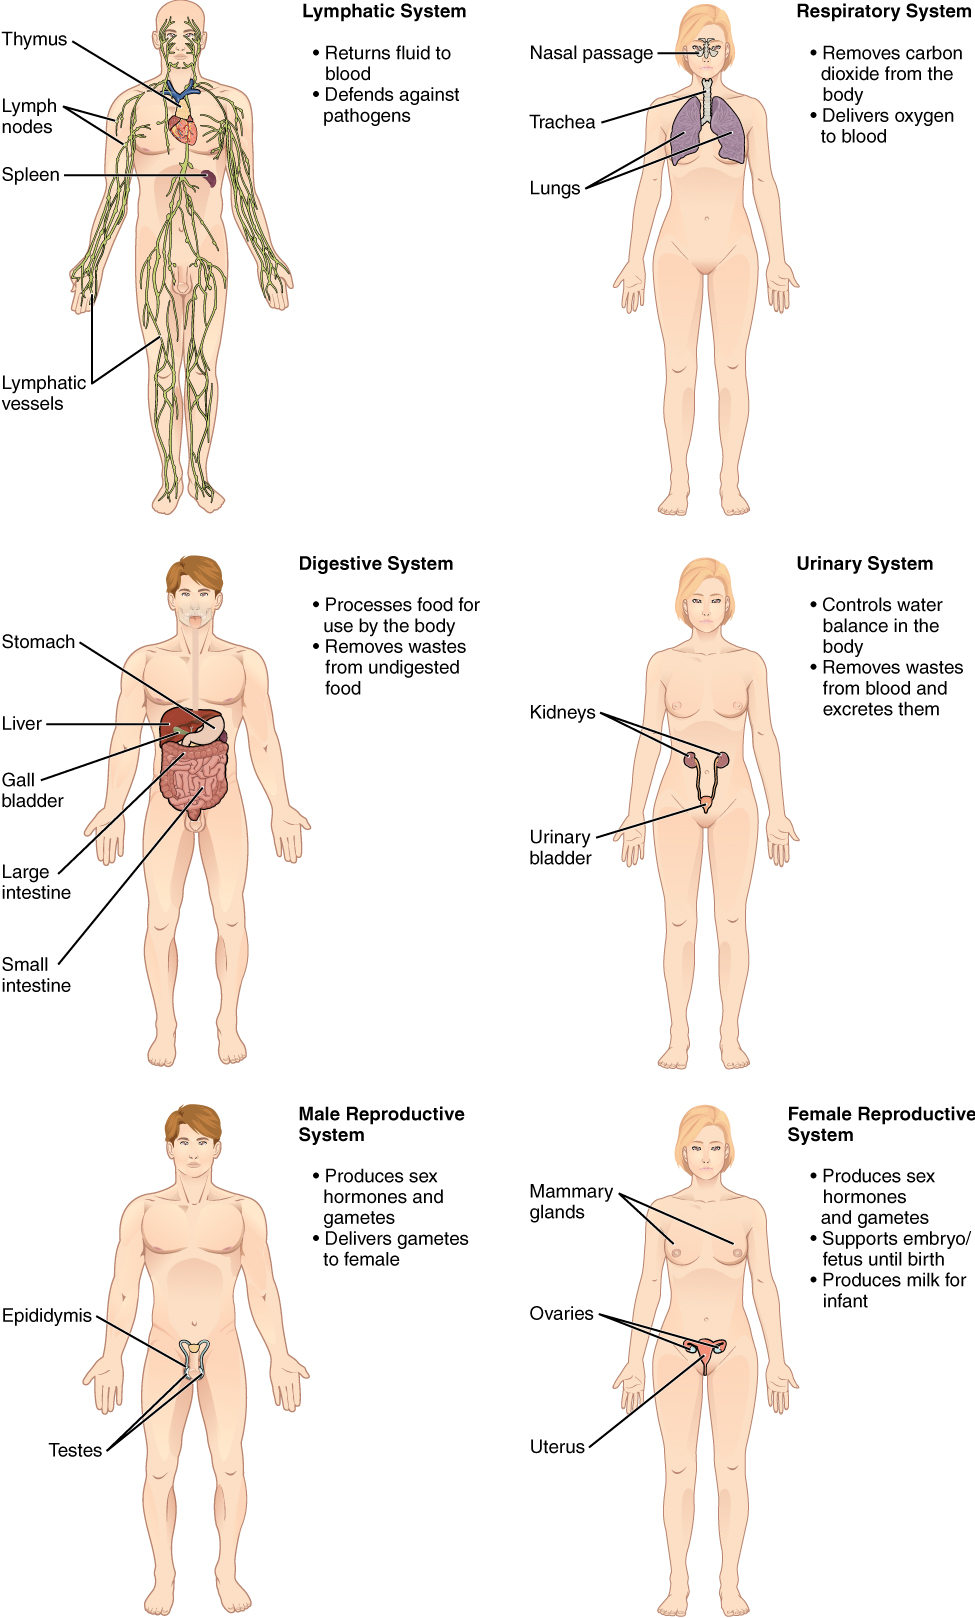 Organ Systems of the Human Body continued from Figure 3.2. Image description available.